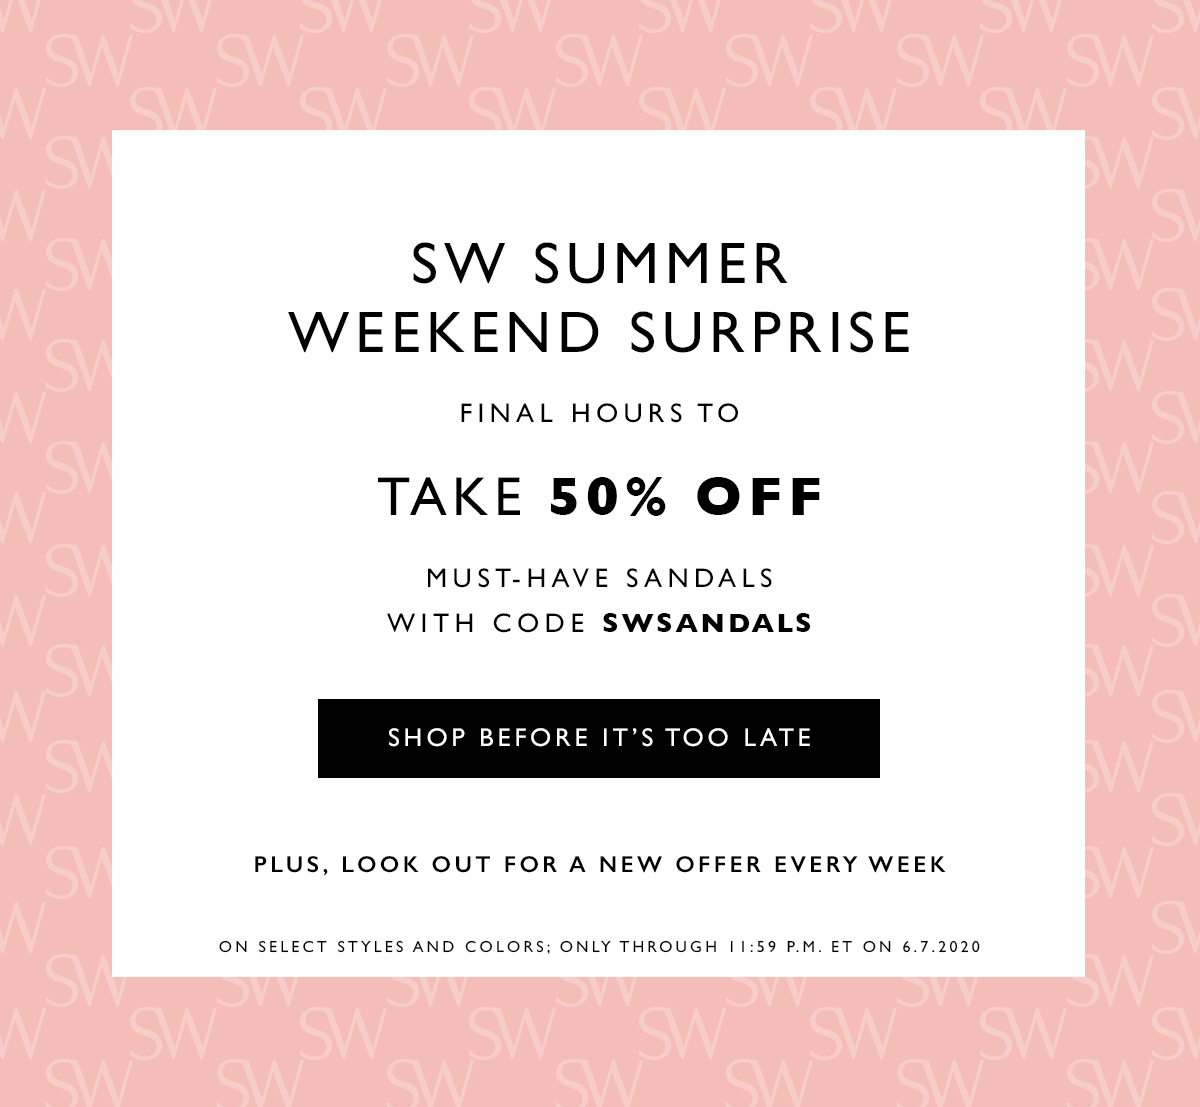  SW Summer Weekend Surprise. Final hours to take 50% off must-have sandals with code SWSANDALS. SHOP BEFORE IT’S TOO LATE . Plus, look out for a new offer every week. On select styles and colors; only through 11:59 P.M. ET on 6.7.2020